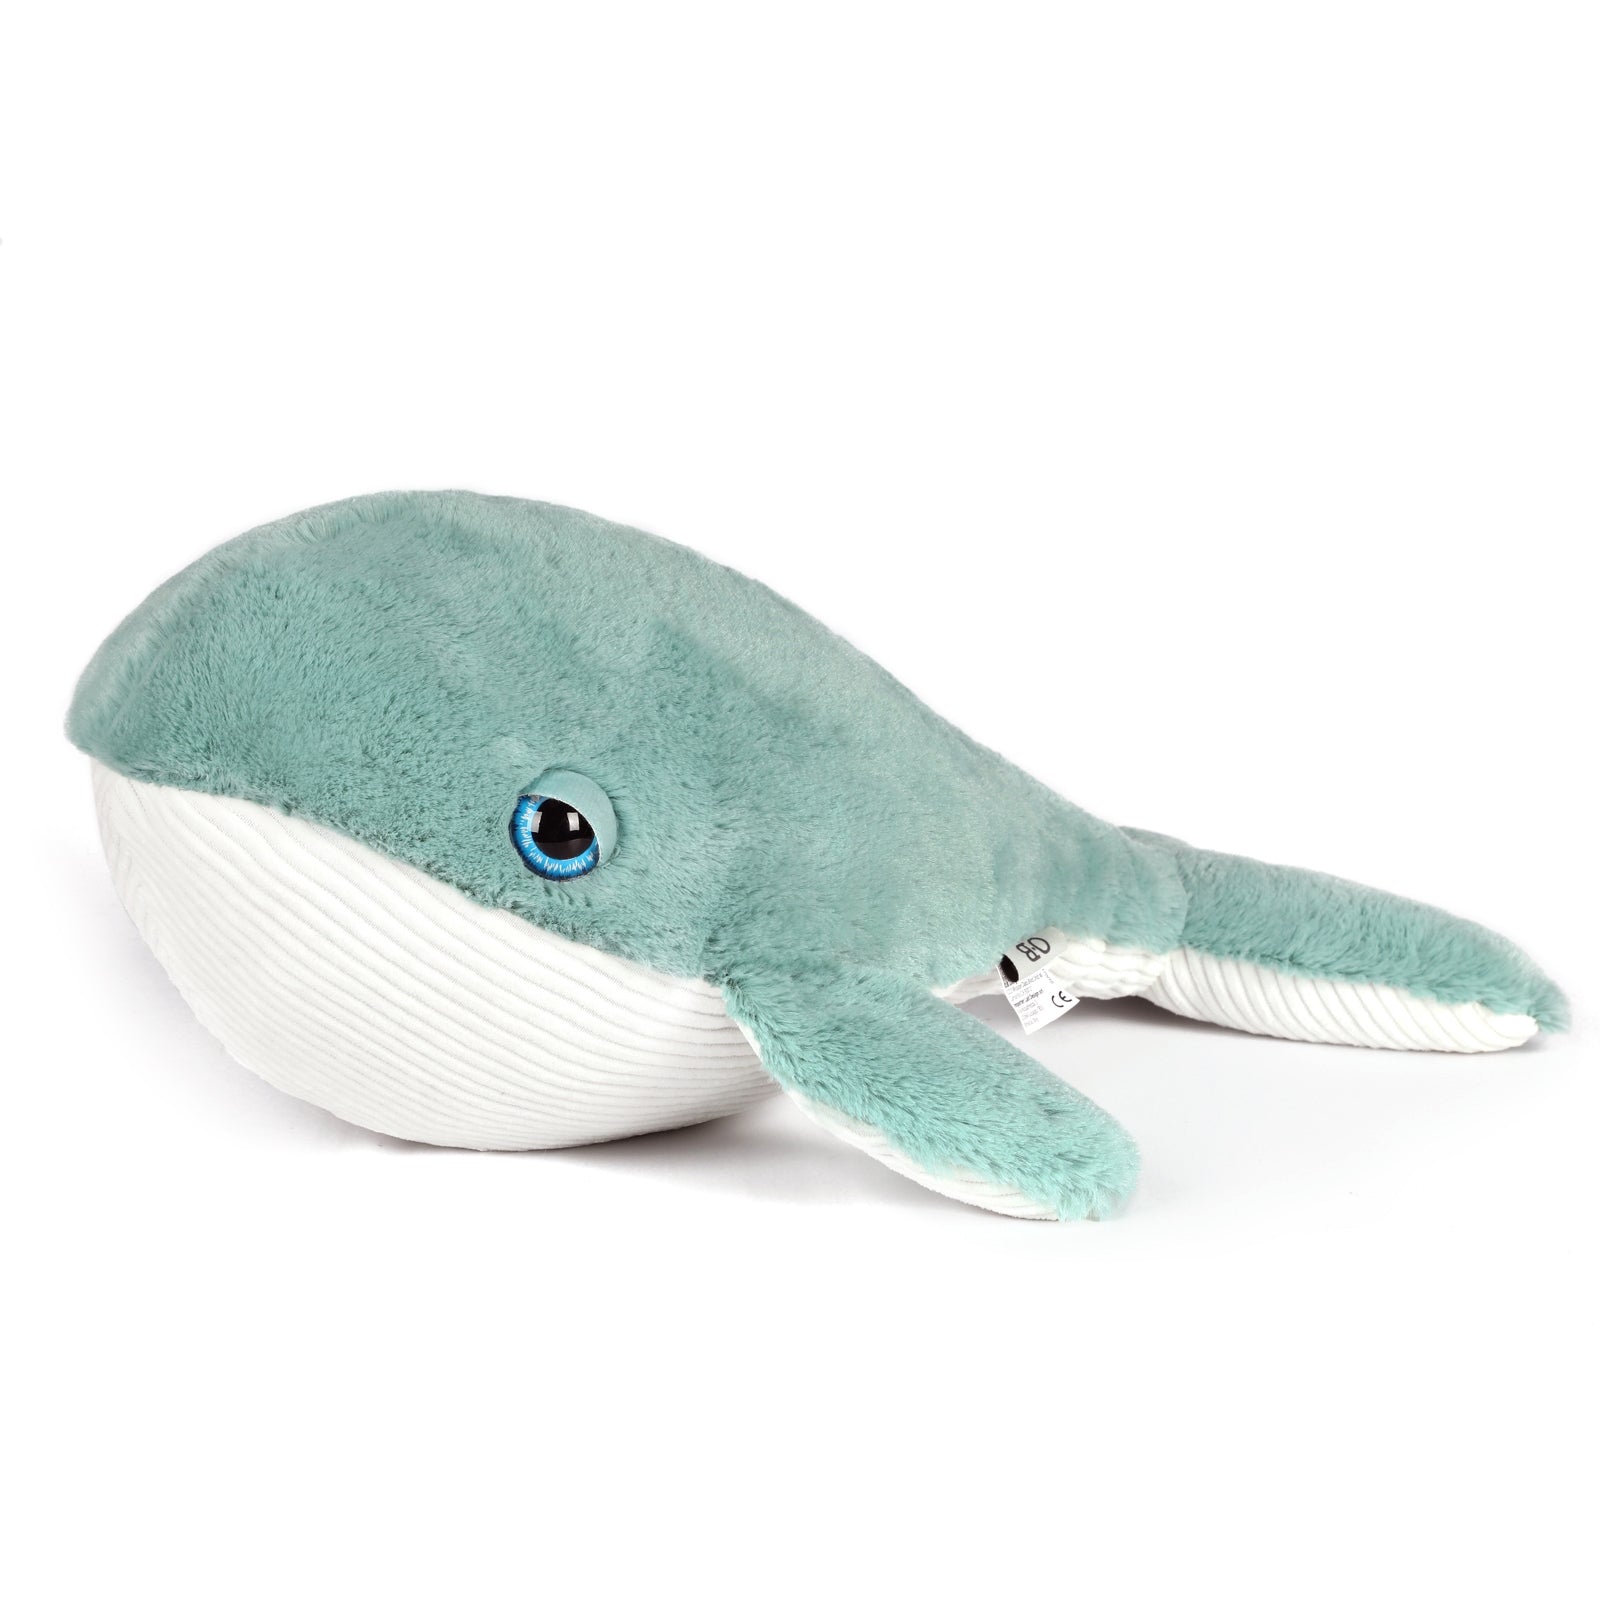 hurley blue whale stuffed animal toy, Designed by OB in Australia